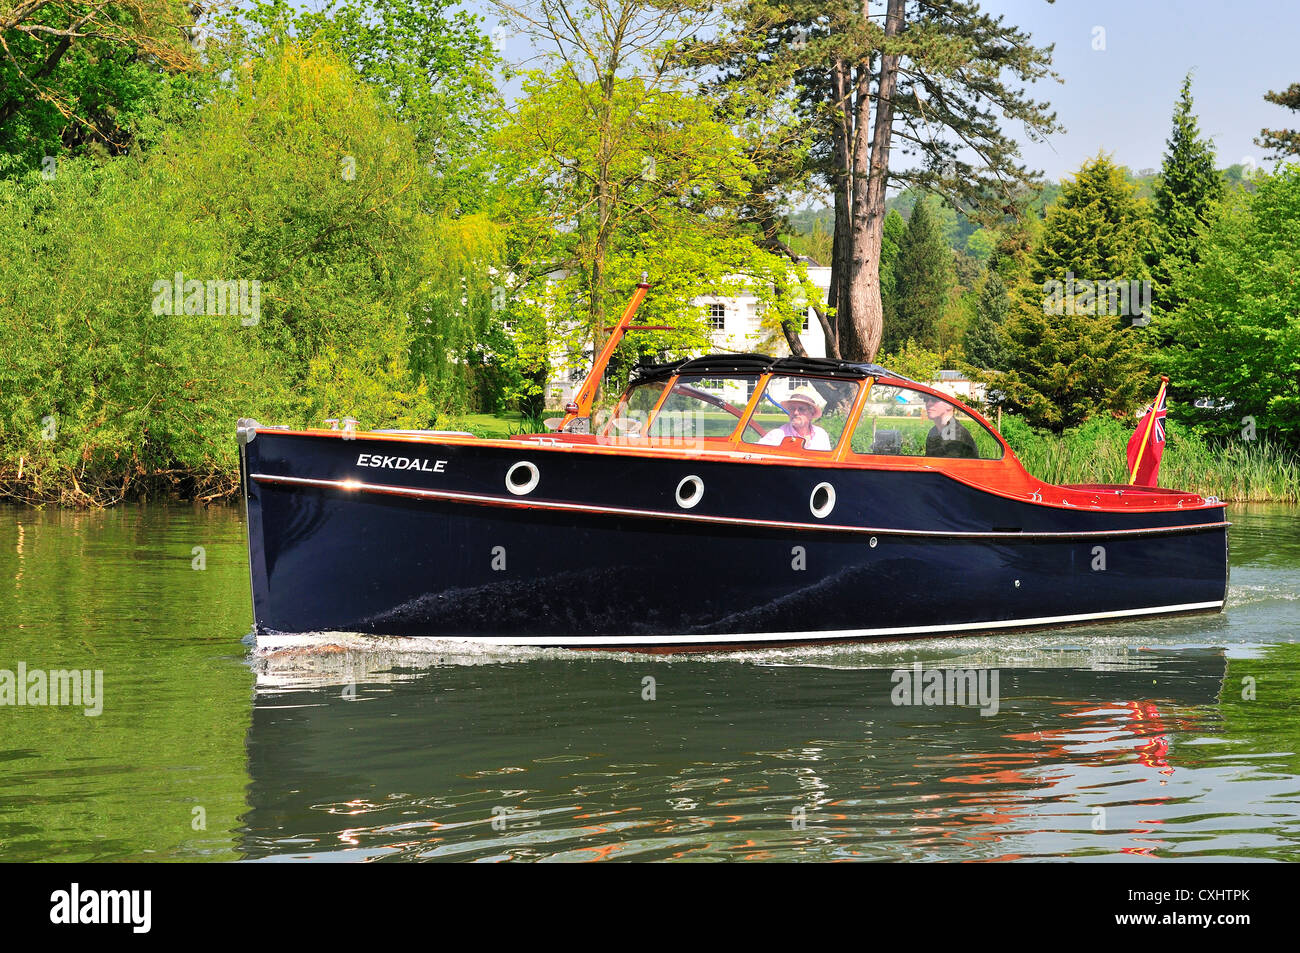 Couple cruising on a gentlemans motor yacht or motorboat on the Upper Reaches of the River Thames at Pangbourne, Berkshire, England, UK Stock Photo